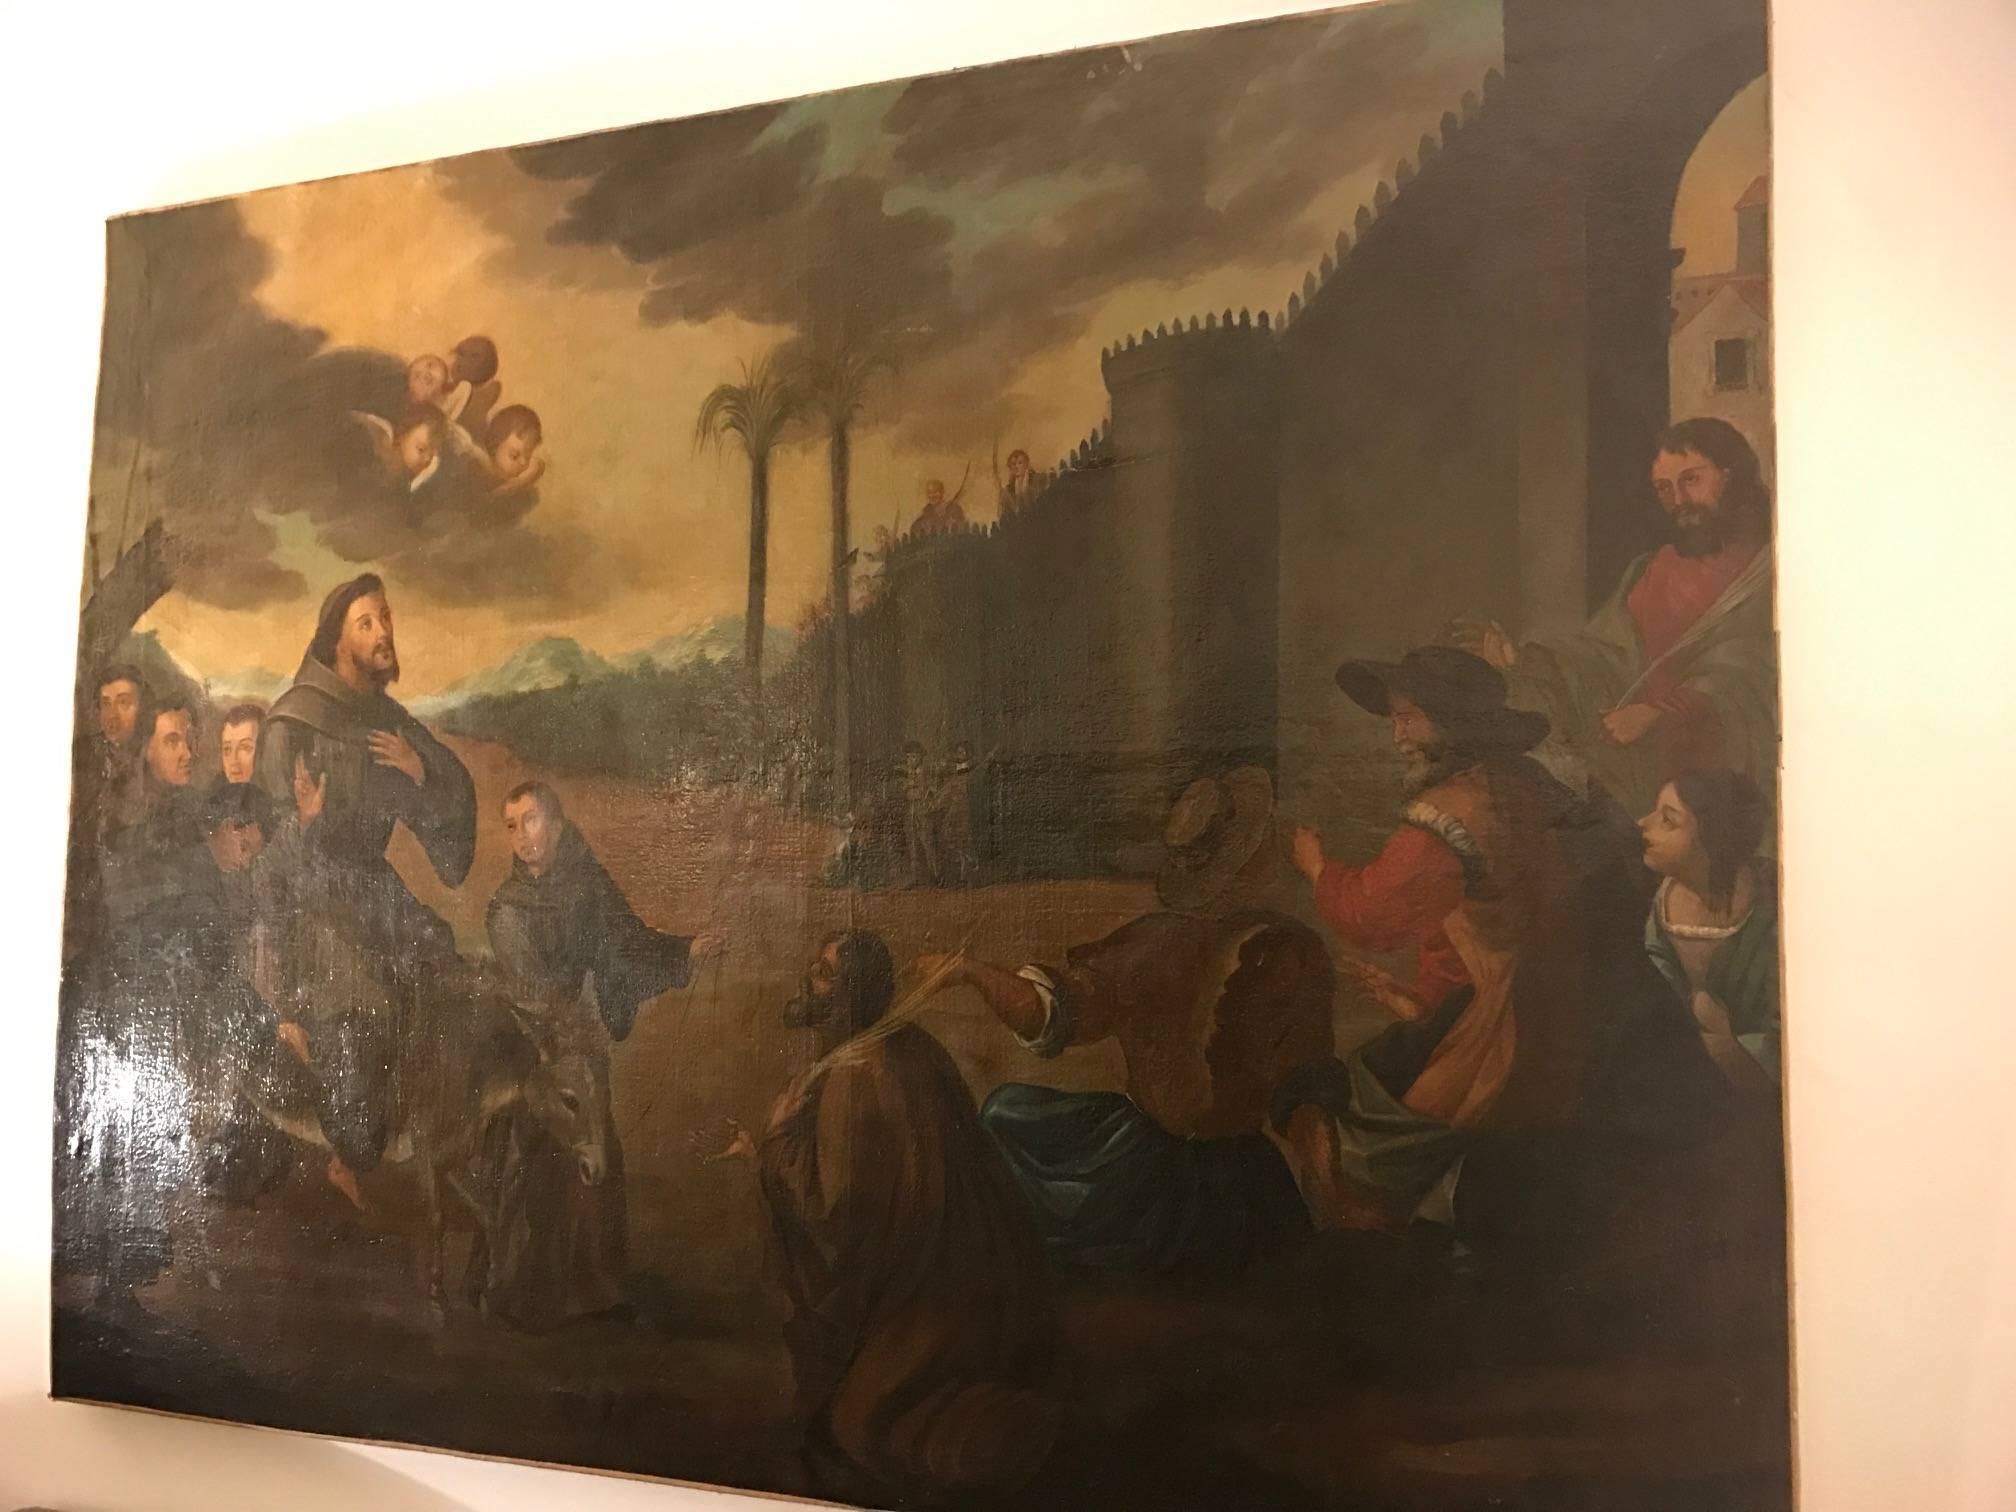 A monumental and stunning Spanish 17th century oil on canvas painting of Saint Francis arriving to Damietta in 1219 during the 5th crusade. Saint Francis went to Egypt to try and convert the Sultan to Christianity and attempt to end the crusade.